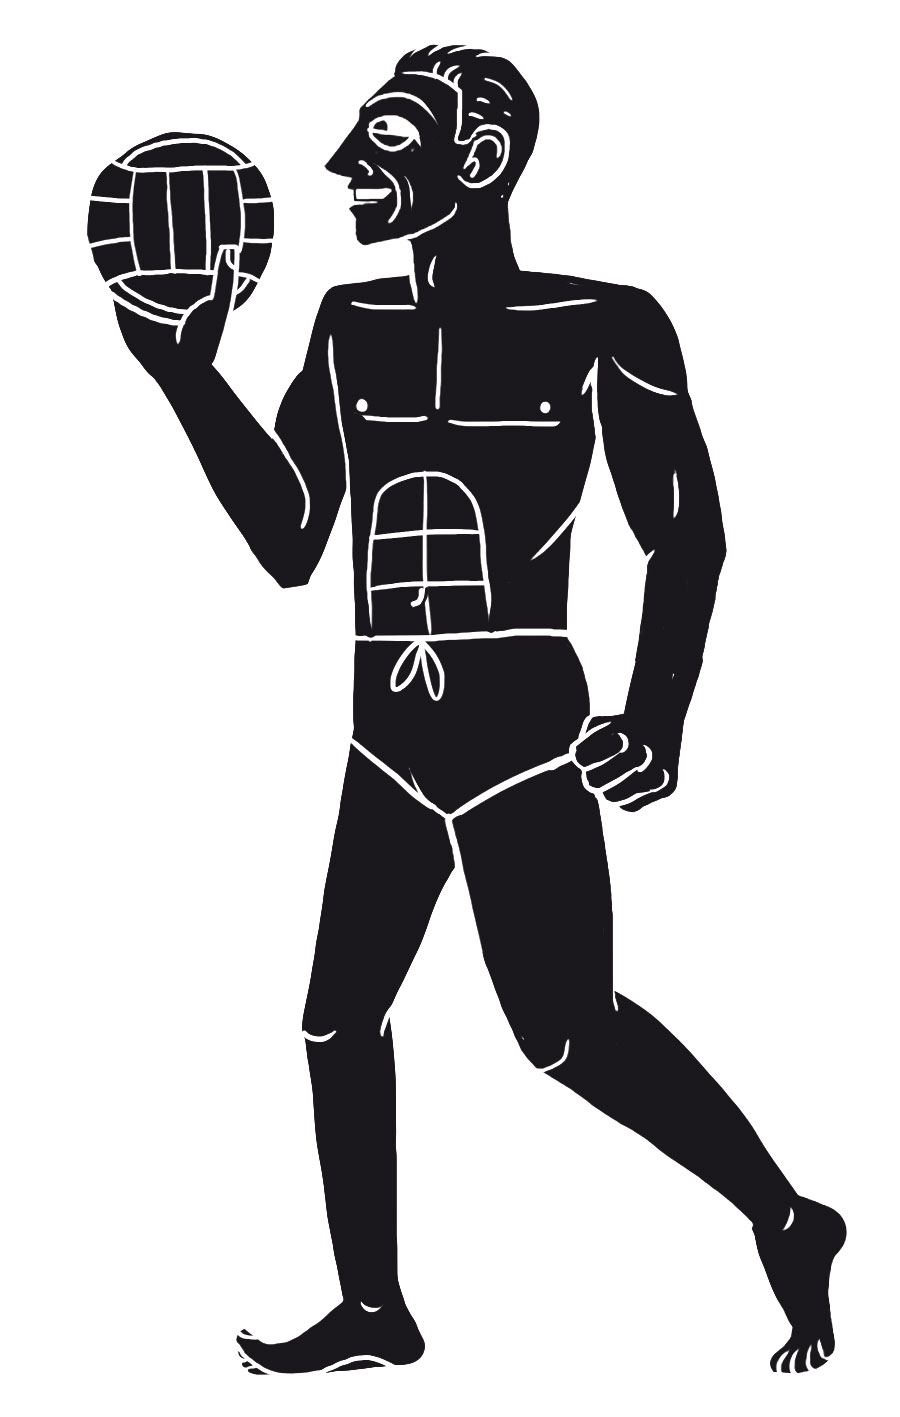 An illustration of a man playing beach volleyball